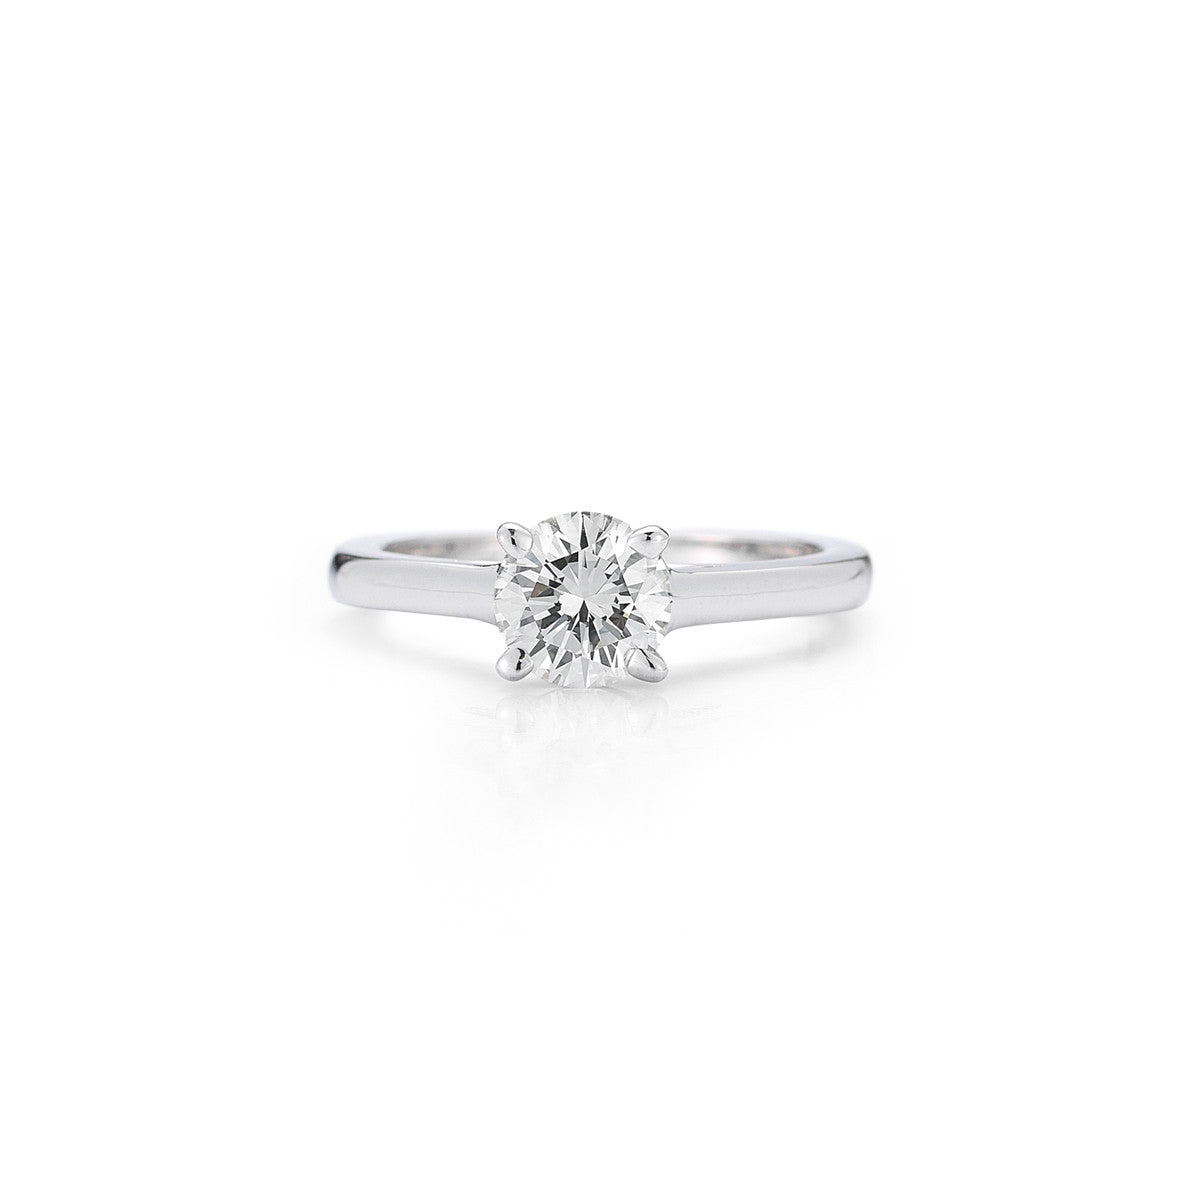 The Maharani Solitaire Engagement Ring